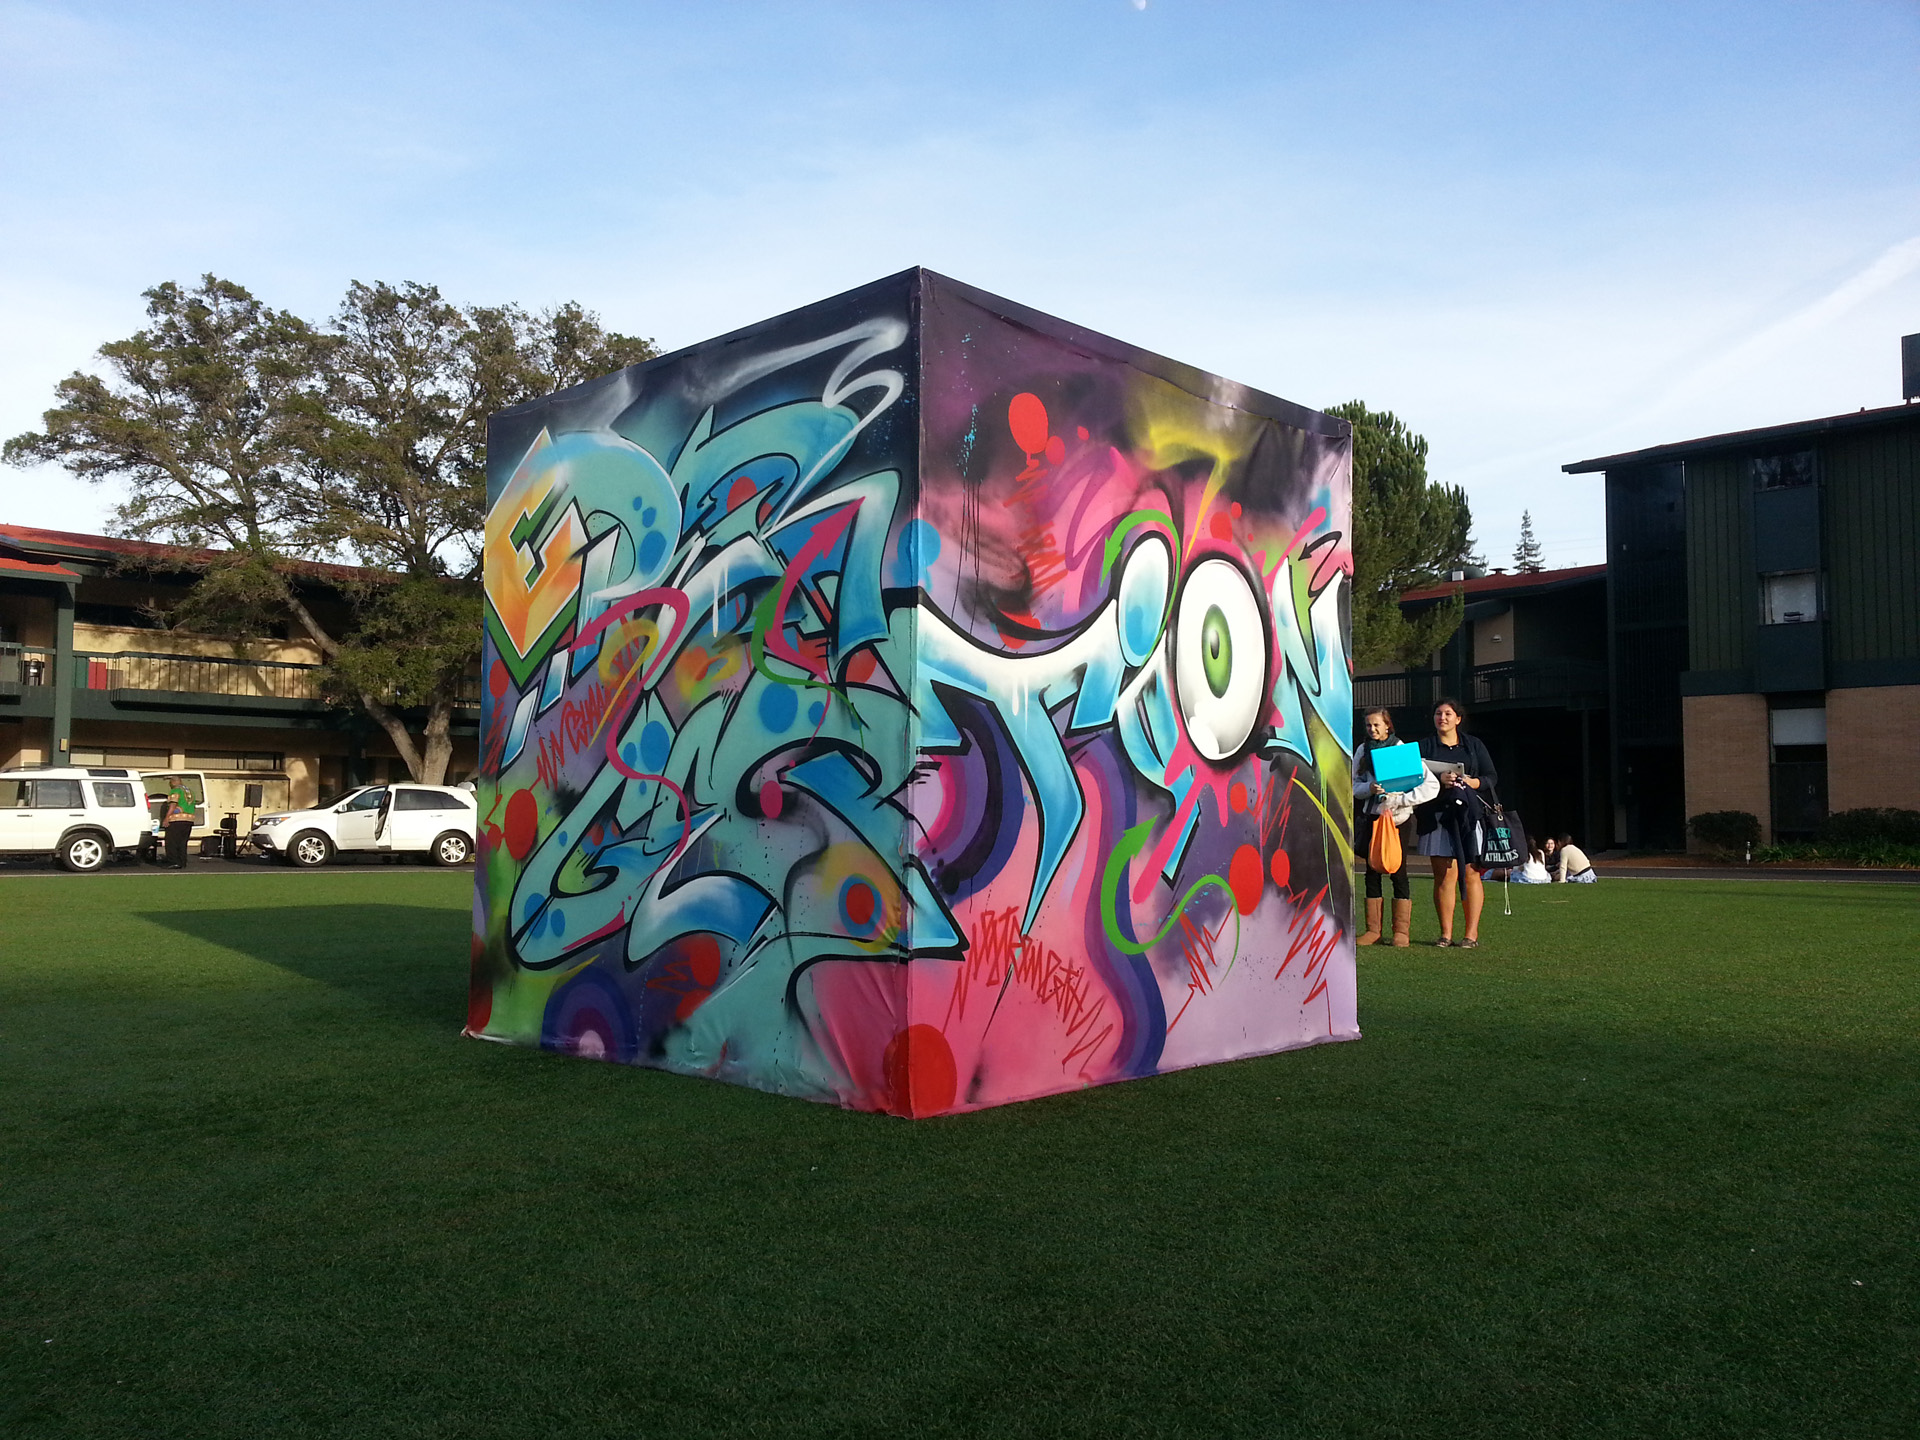 Students at Castilleja School, in San Jose, created "The Perception, Expression Cube" during a week-long collaboration with Scape Martinez and MMAP.